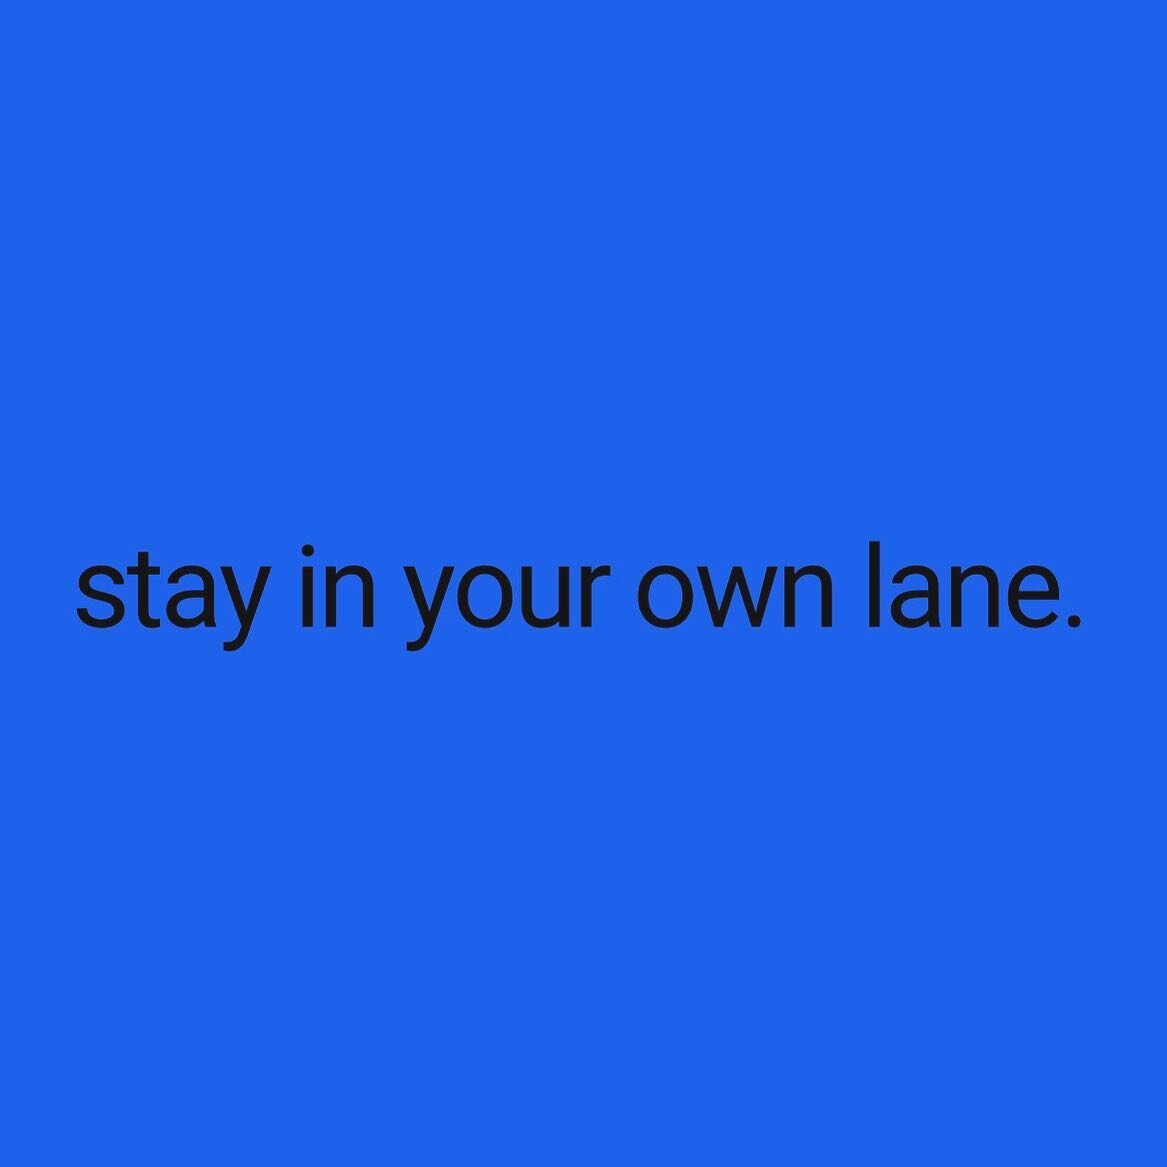 stay in your own lane.
#lesstraffic #mindyourbusiness #awareness #mindfullness #stayfocused #drive #intensity #freedom #individual #stayinyourlane #lifestylearchitect #designlife #staydriven #be #bethanynewellofficial